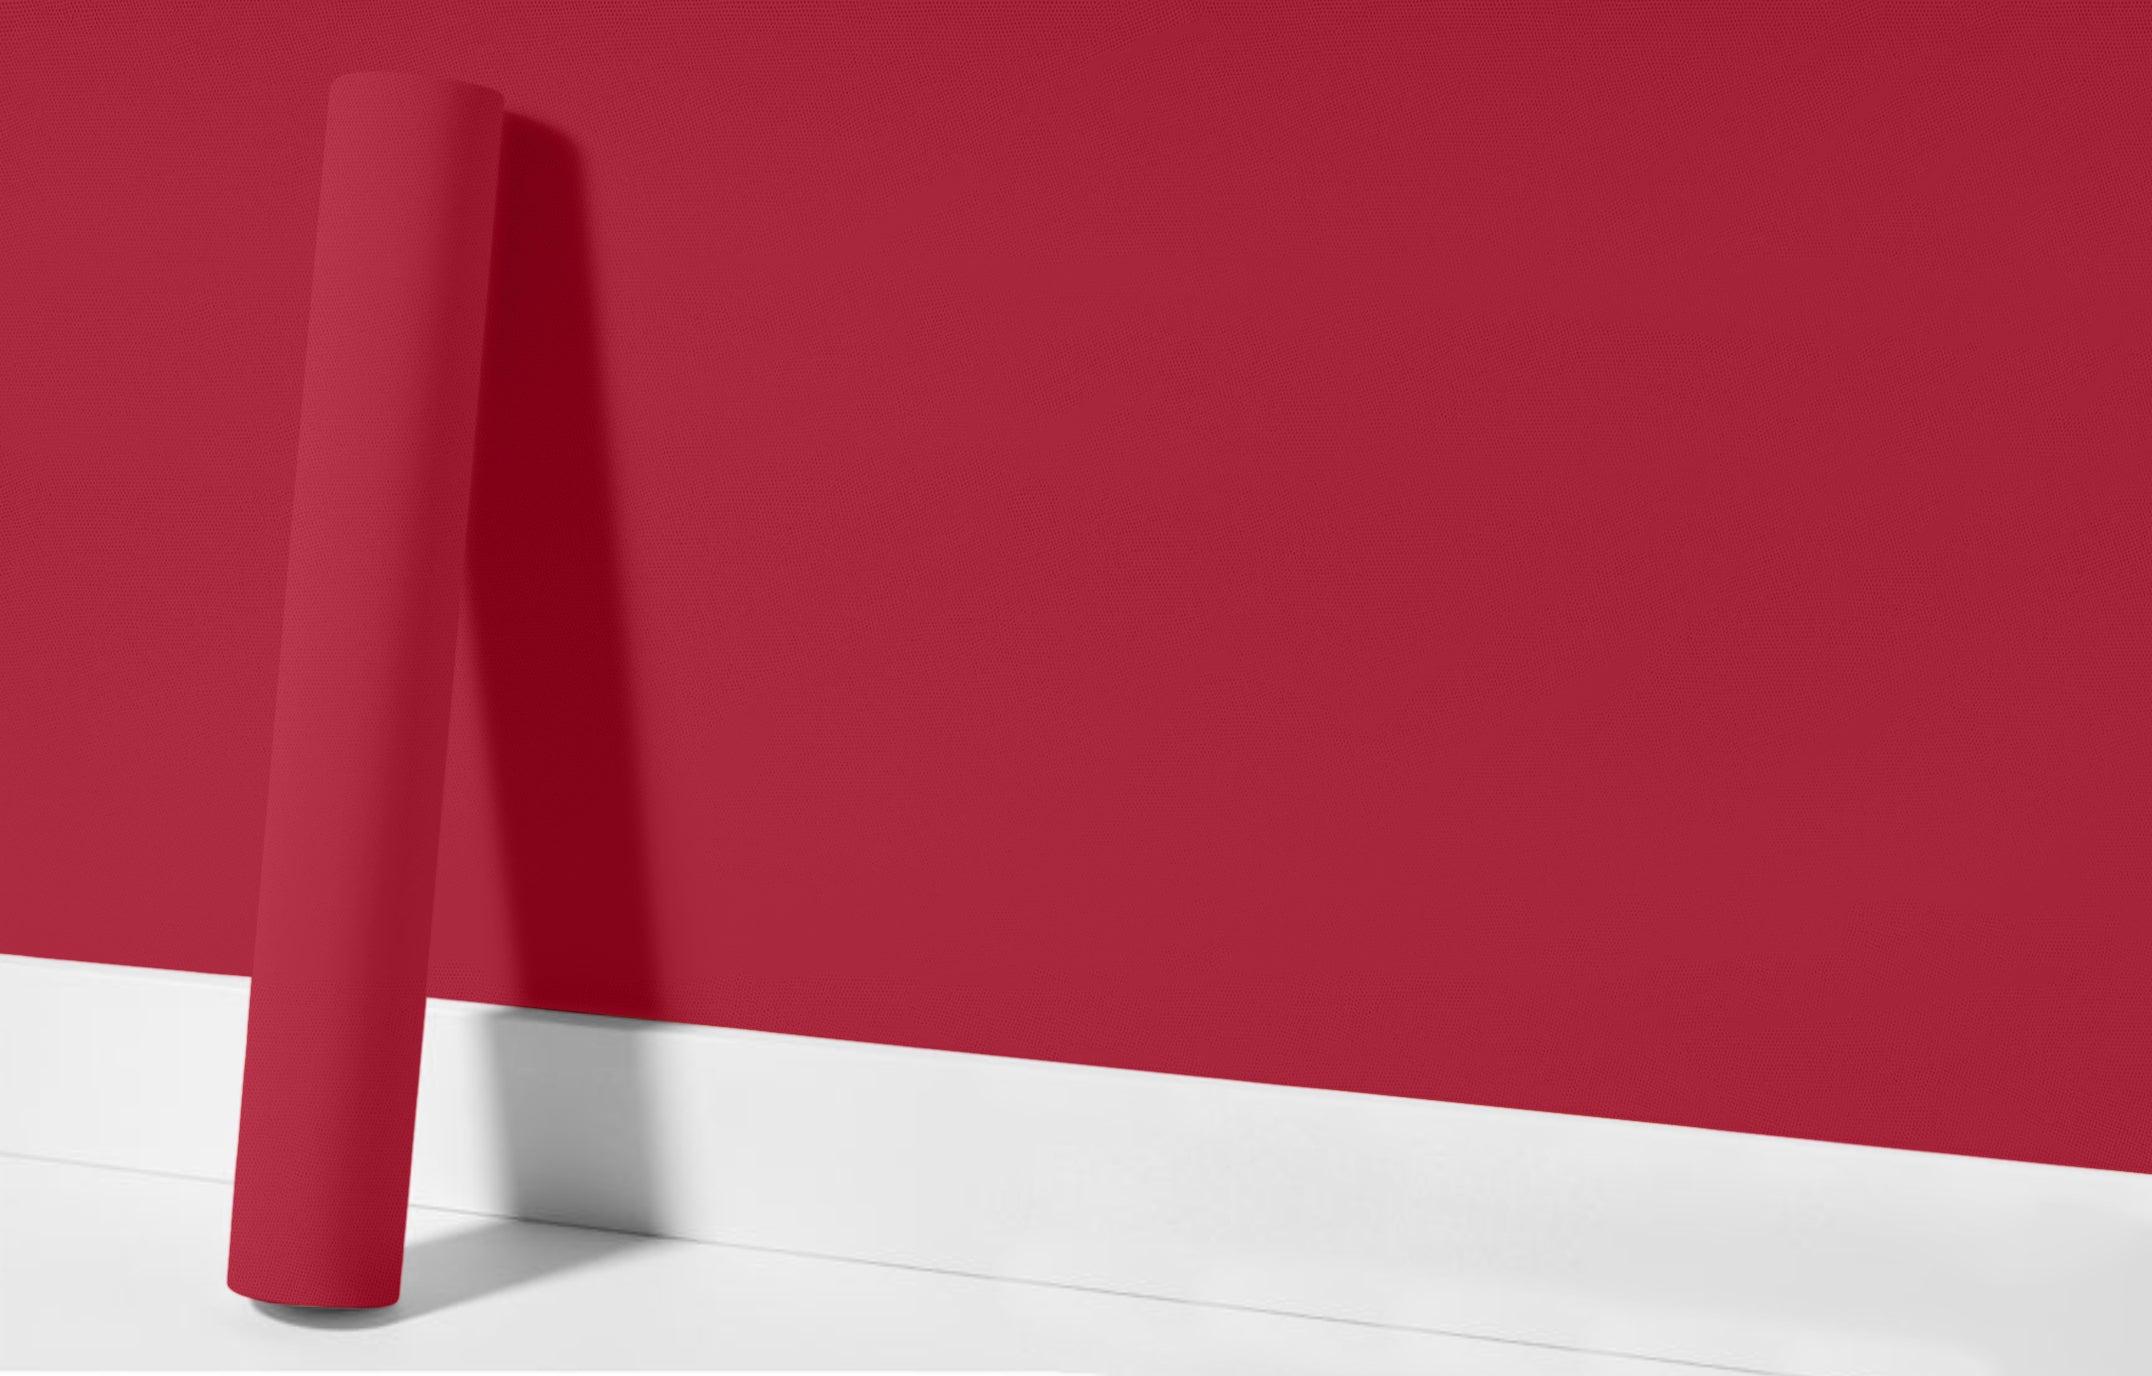 Peel & Stick Removable Re-usable Paint - Color RAL 3027 Raspberry Red - offRAL™ - RALRAW LLC, USA